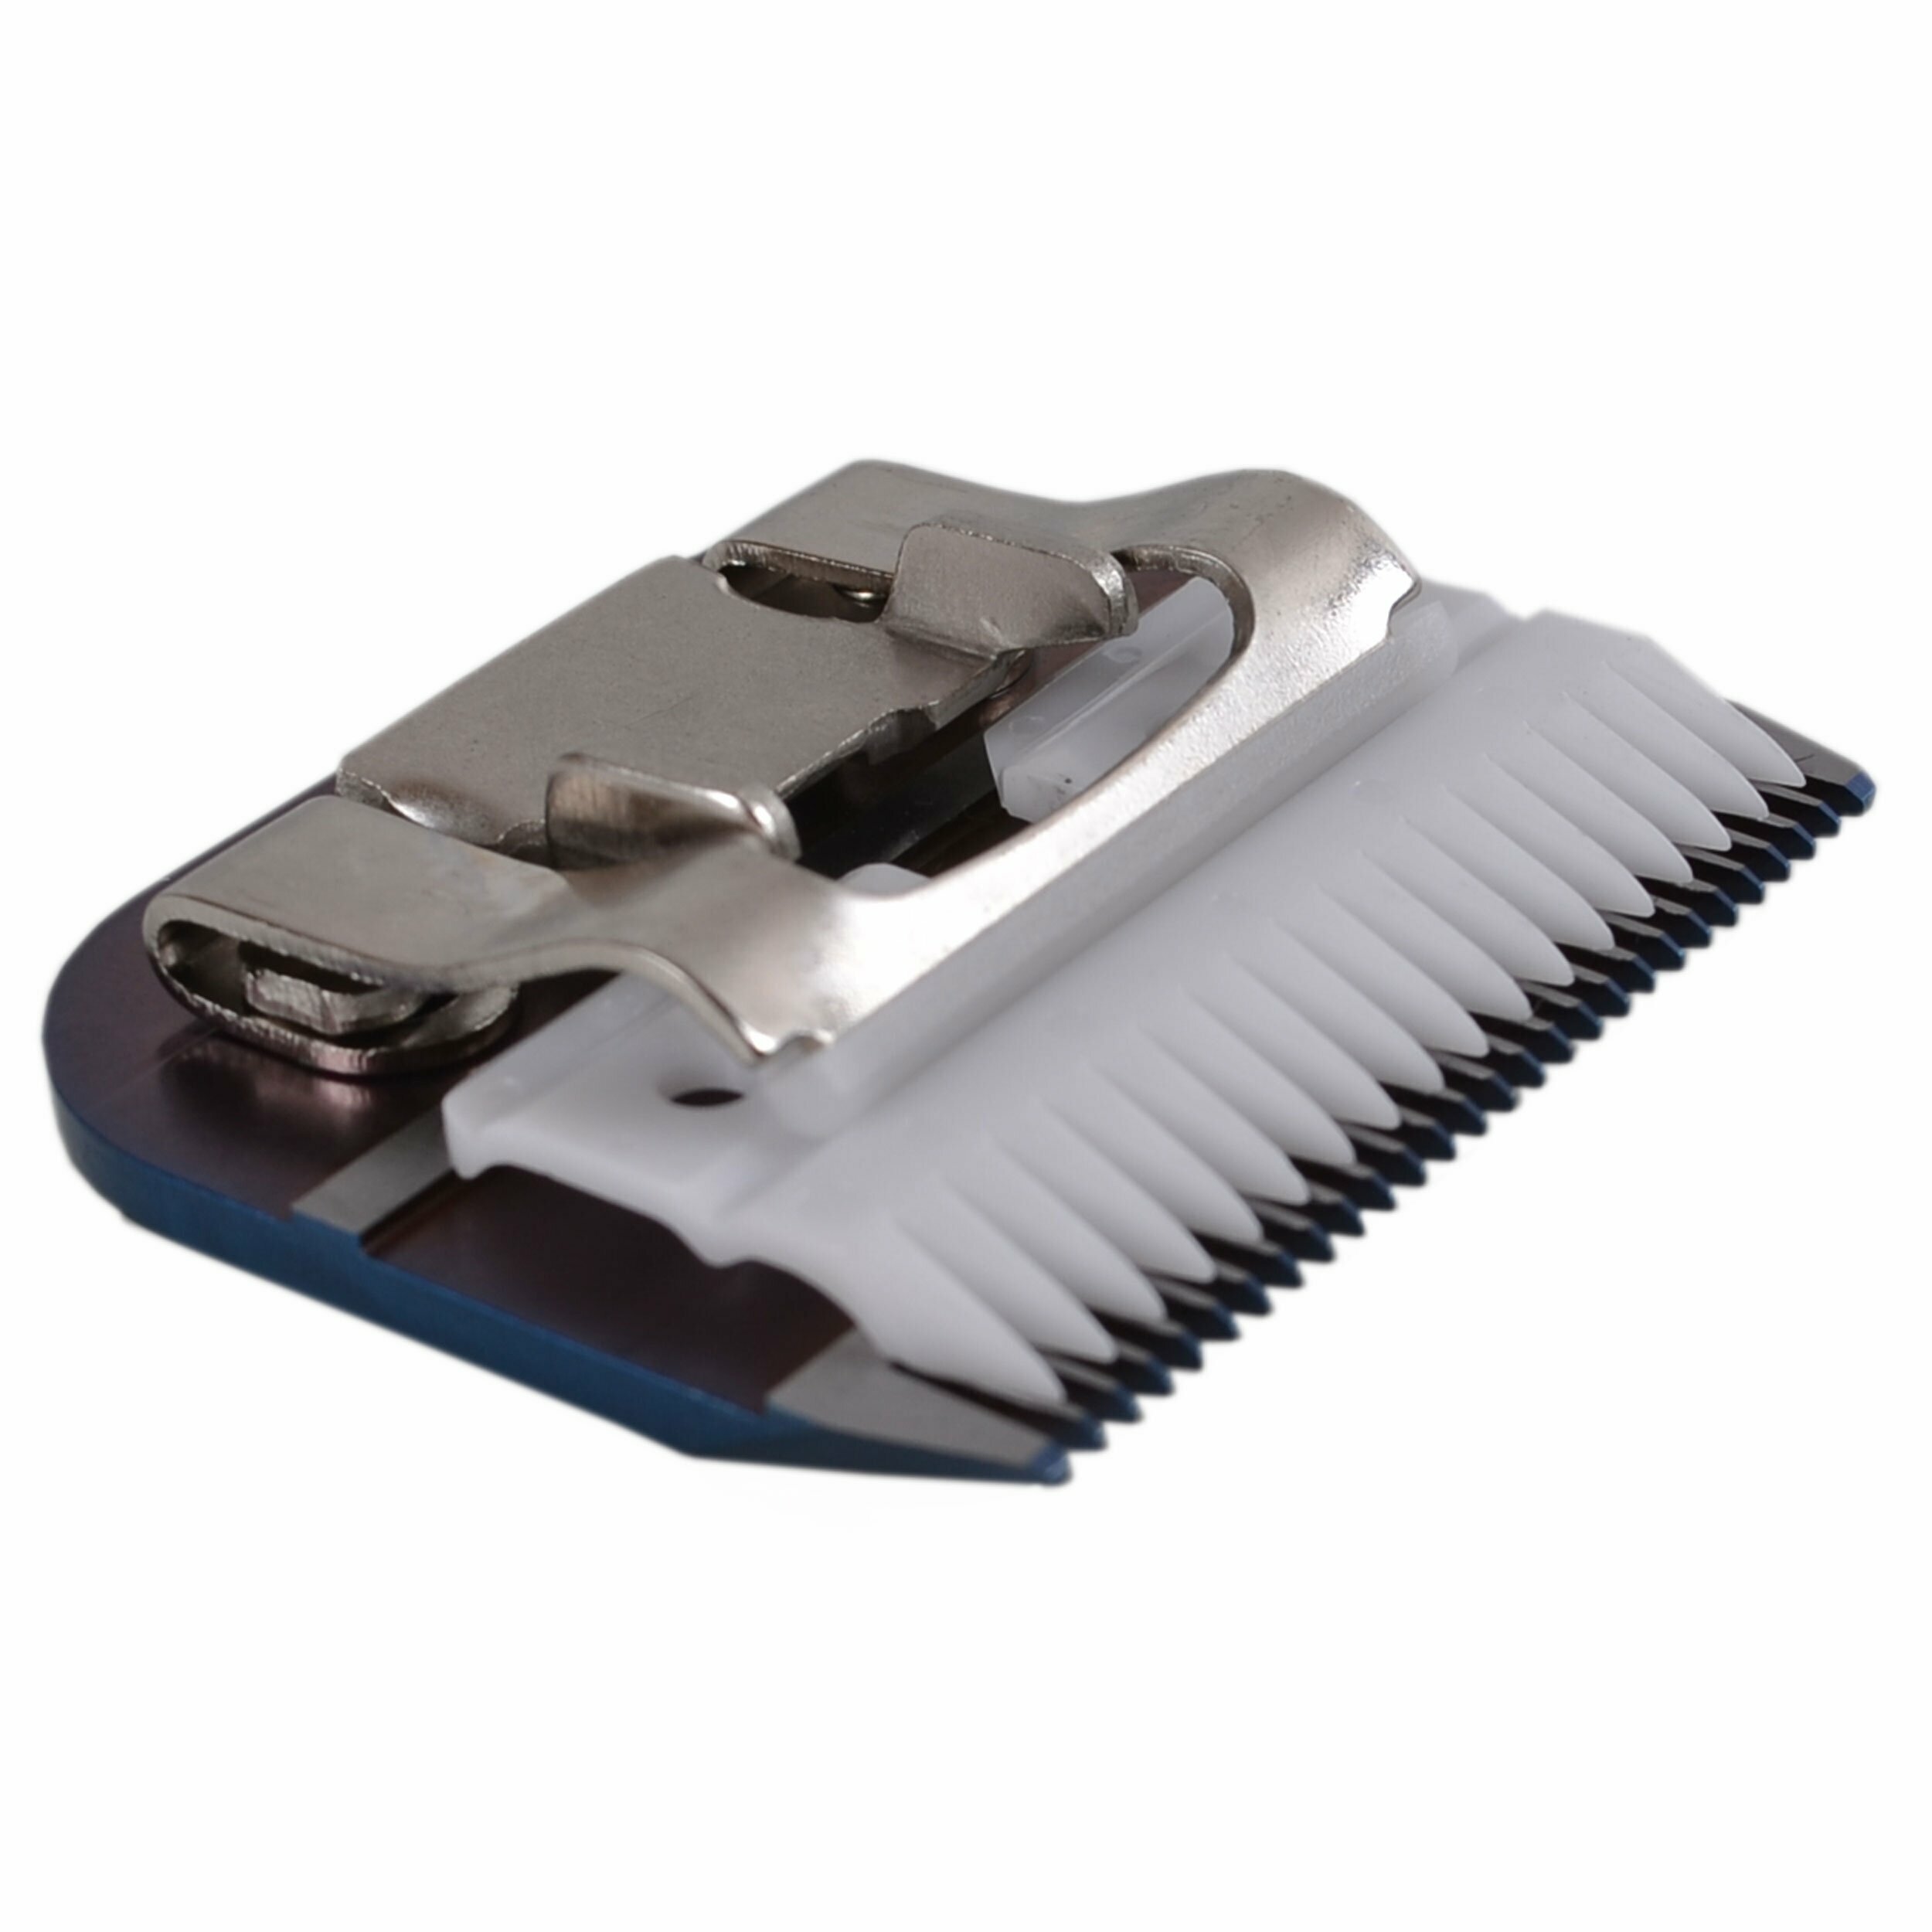 Blade Size 10 - 1.6 mm for Oster, Andis, Wahl Moser, Heiniger, Optimum and many other pet clippers